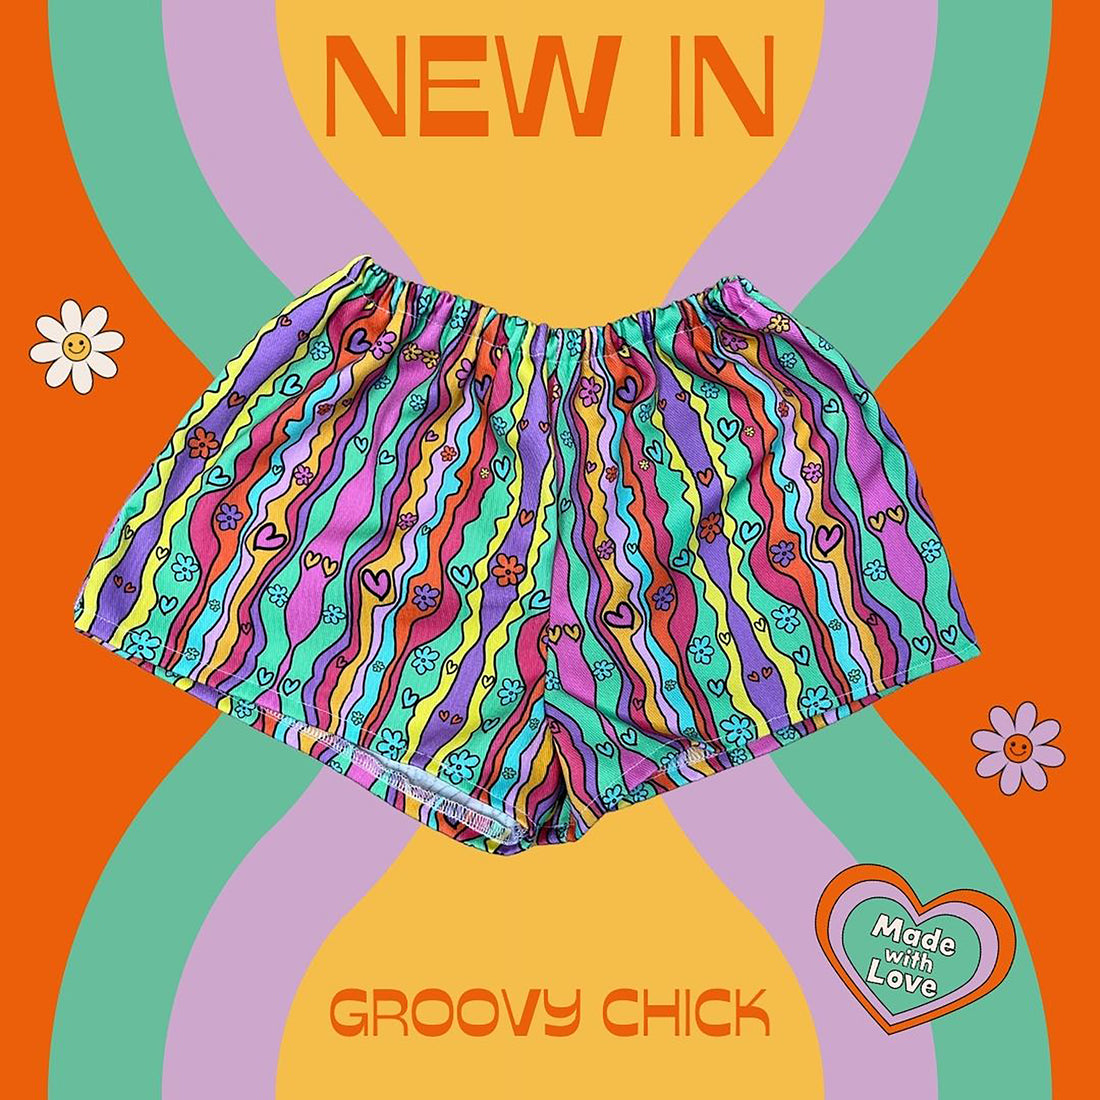 Groovy Chick!! ❤️